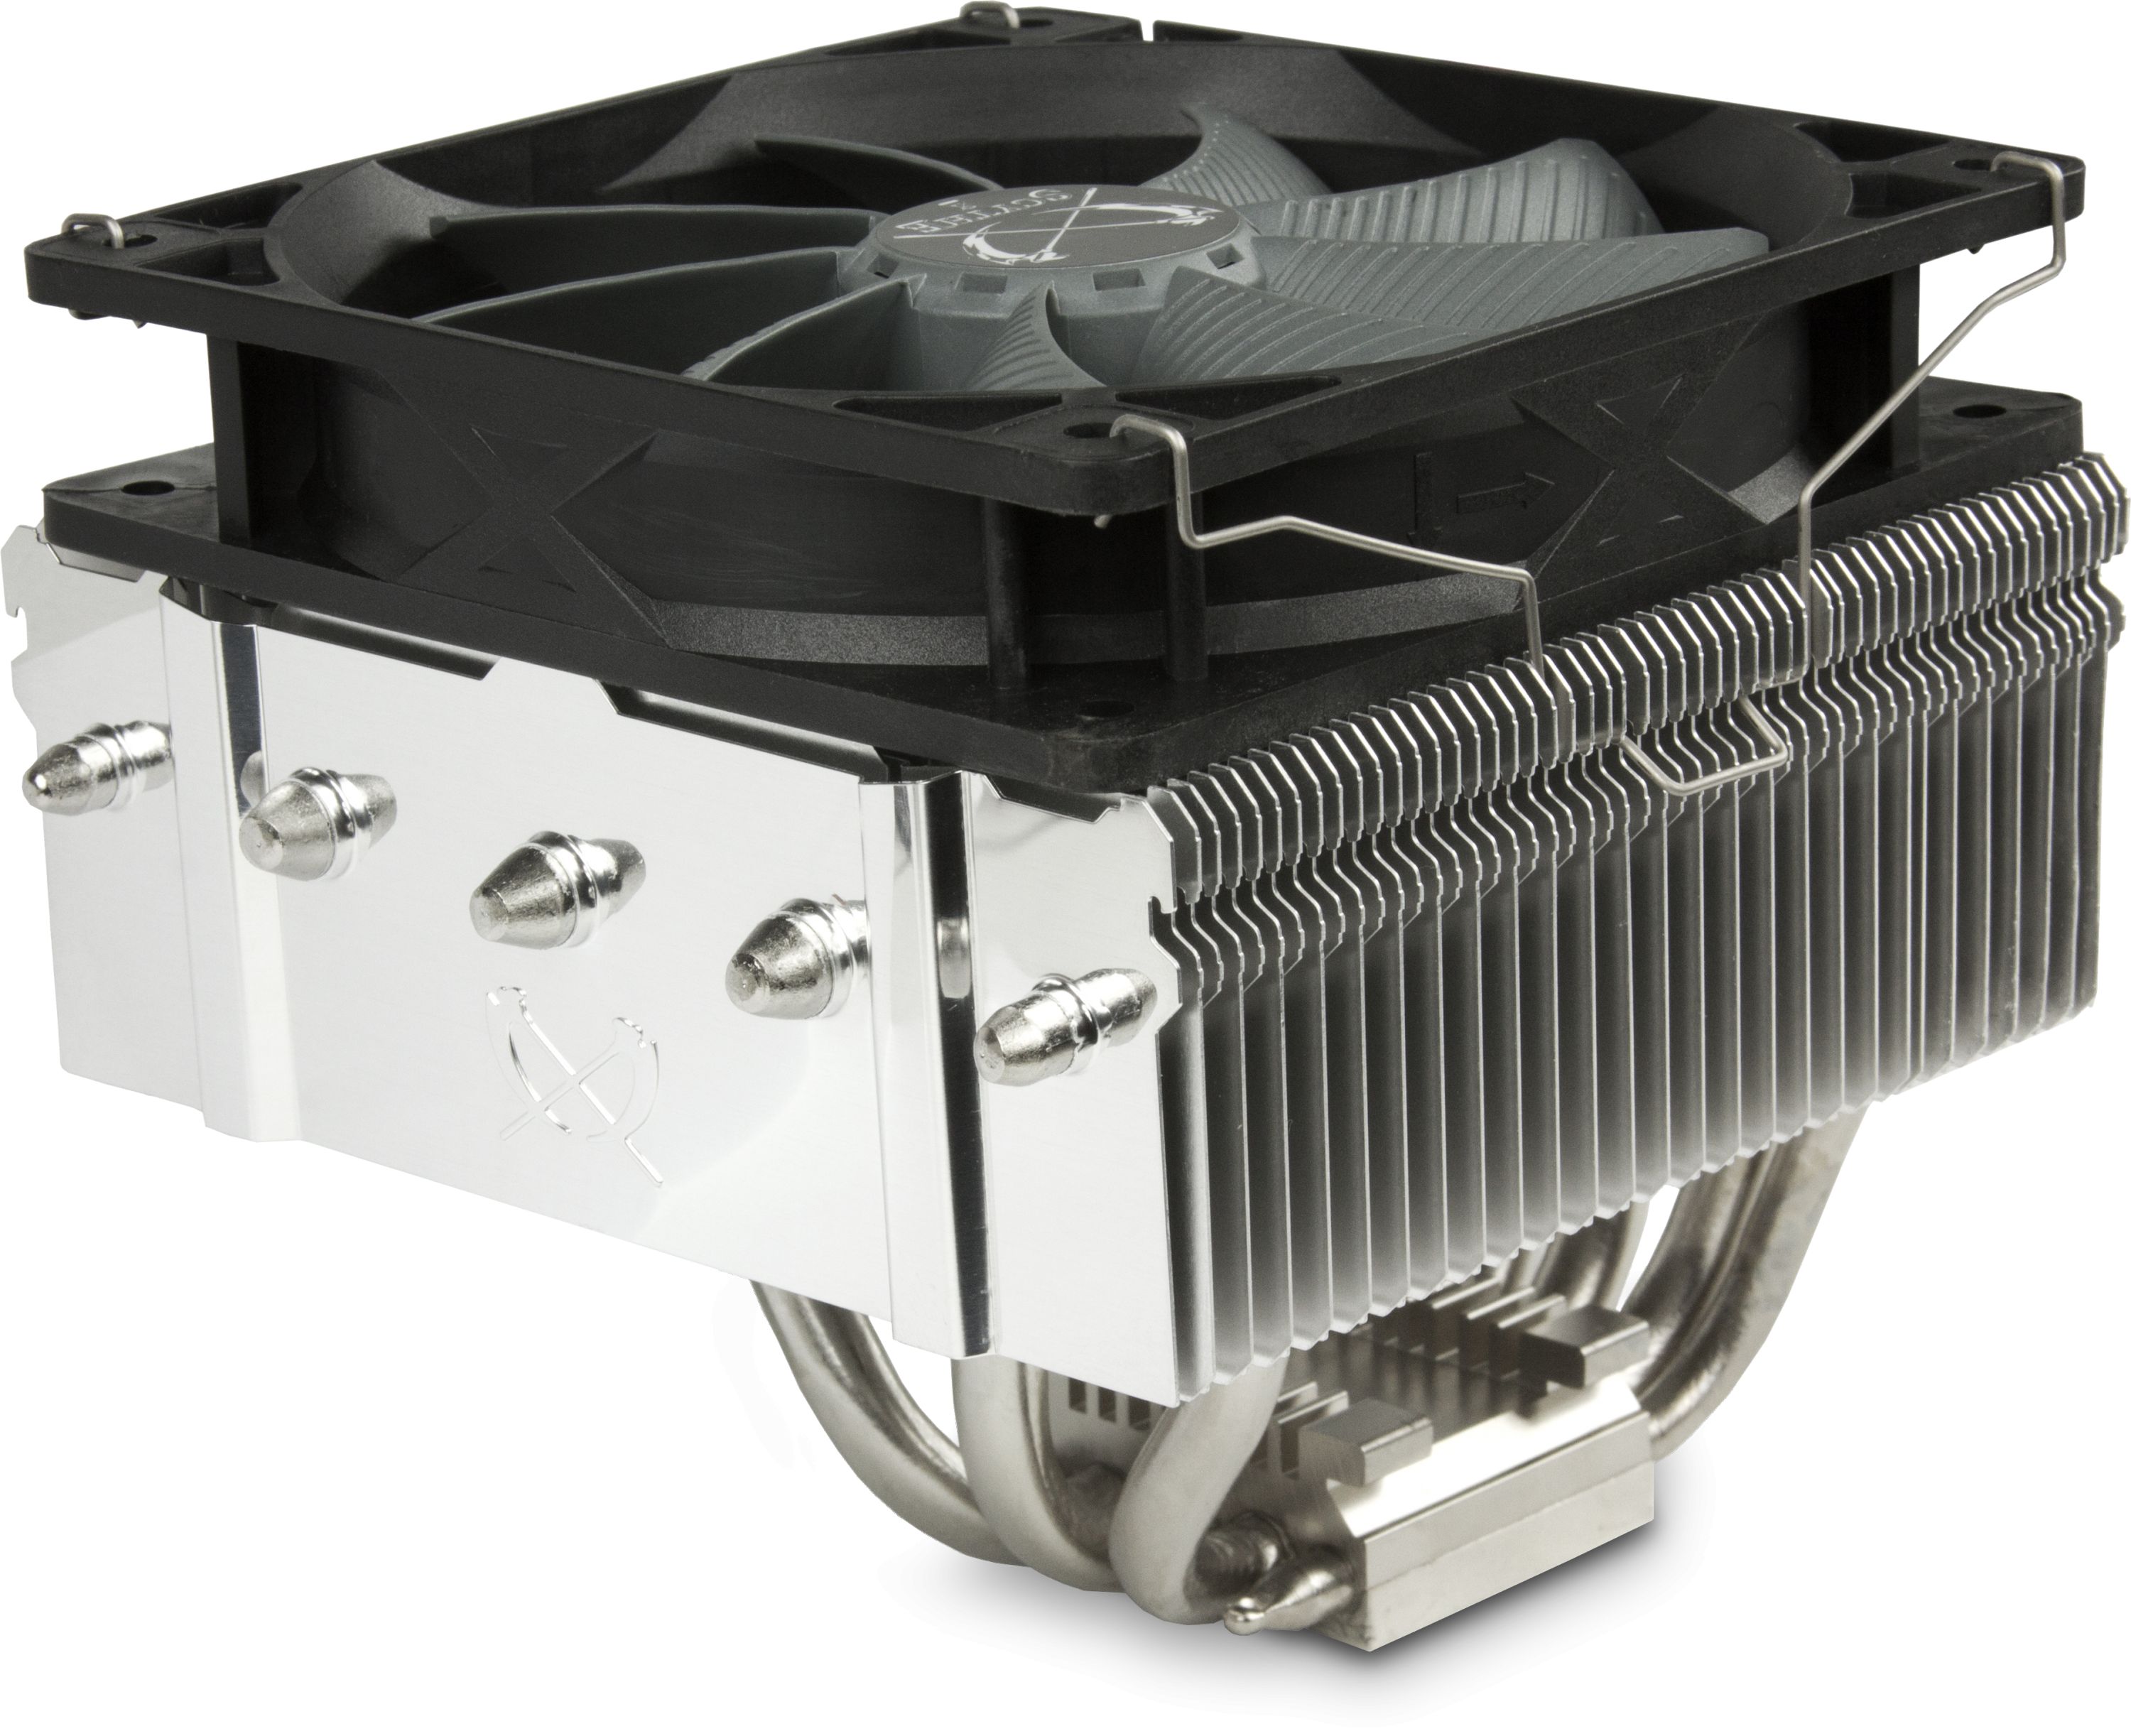 This Top-Down CPU Air-Cooler Offers Cooling Up To 265W, Rivals